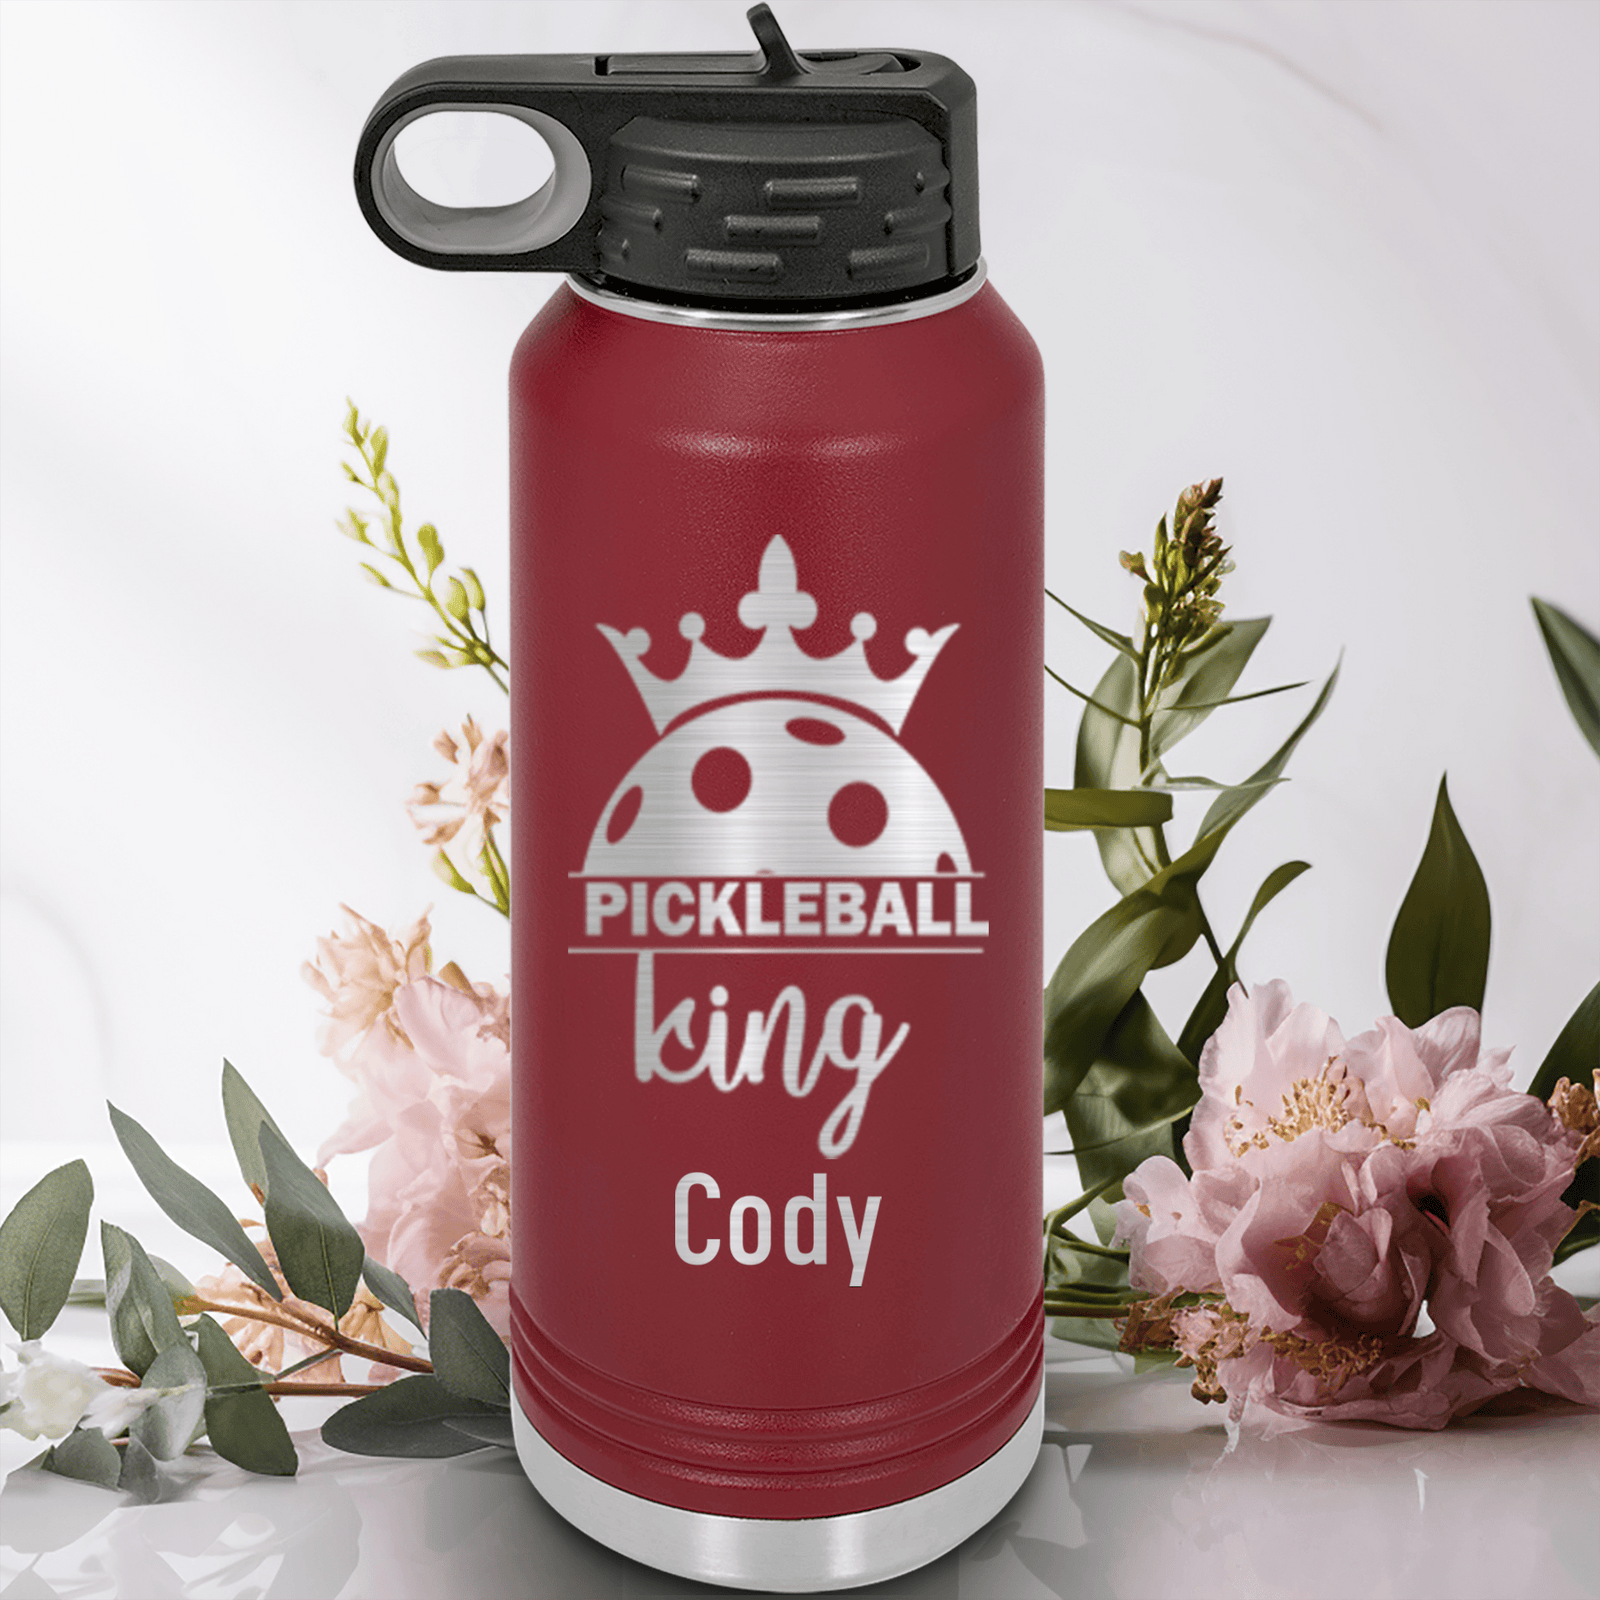 Maroon Pickleball Water Bottle With Pickle King Design